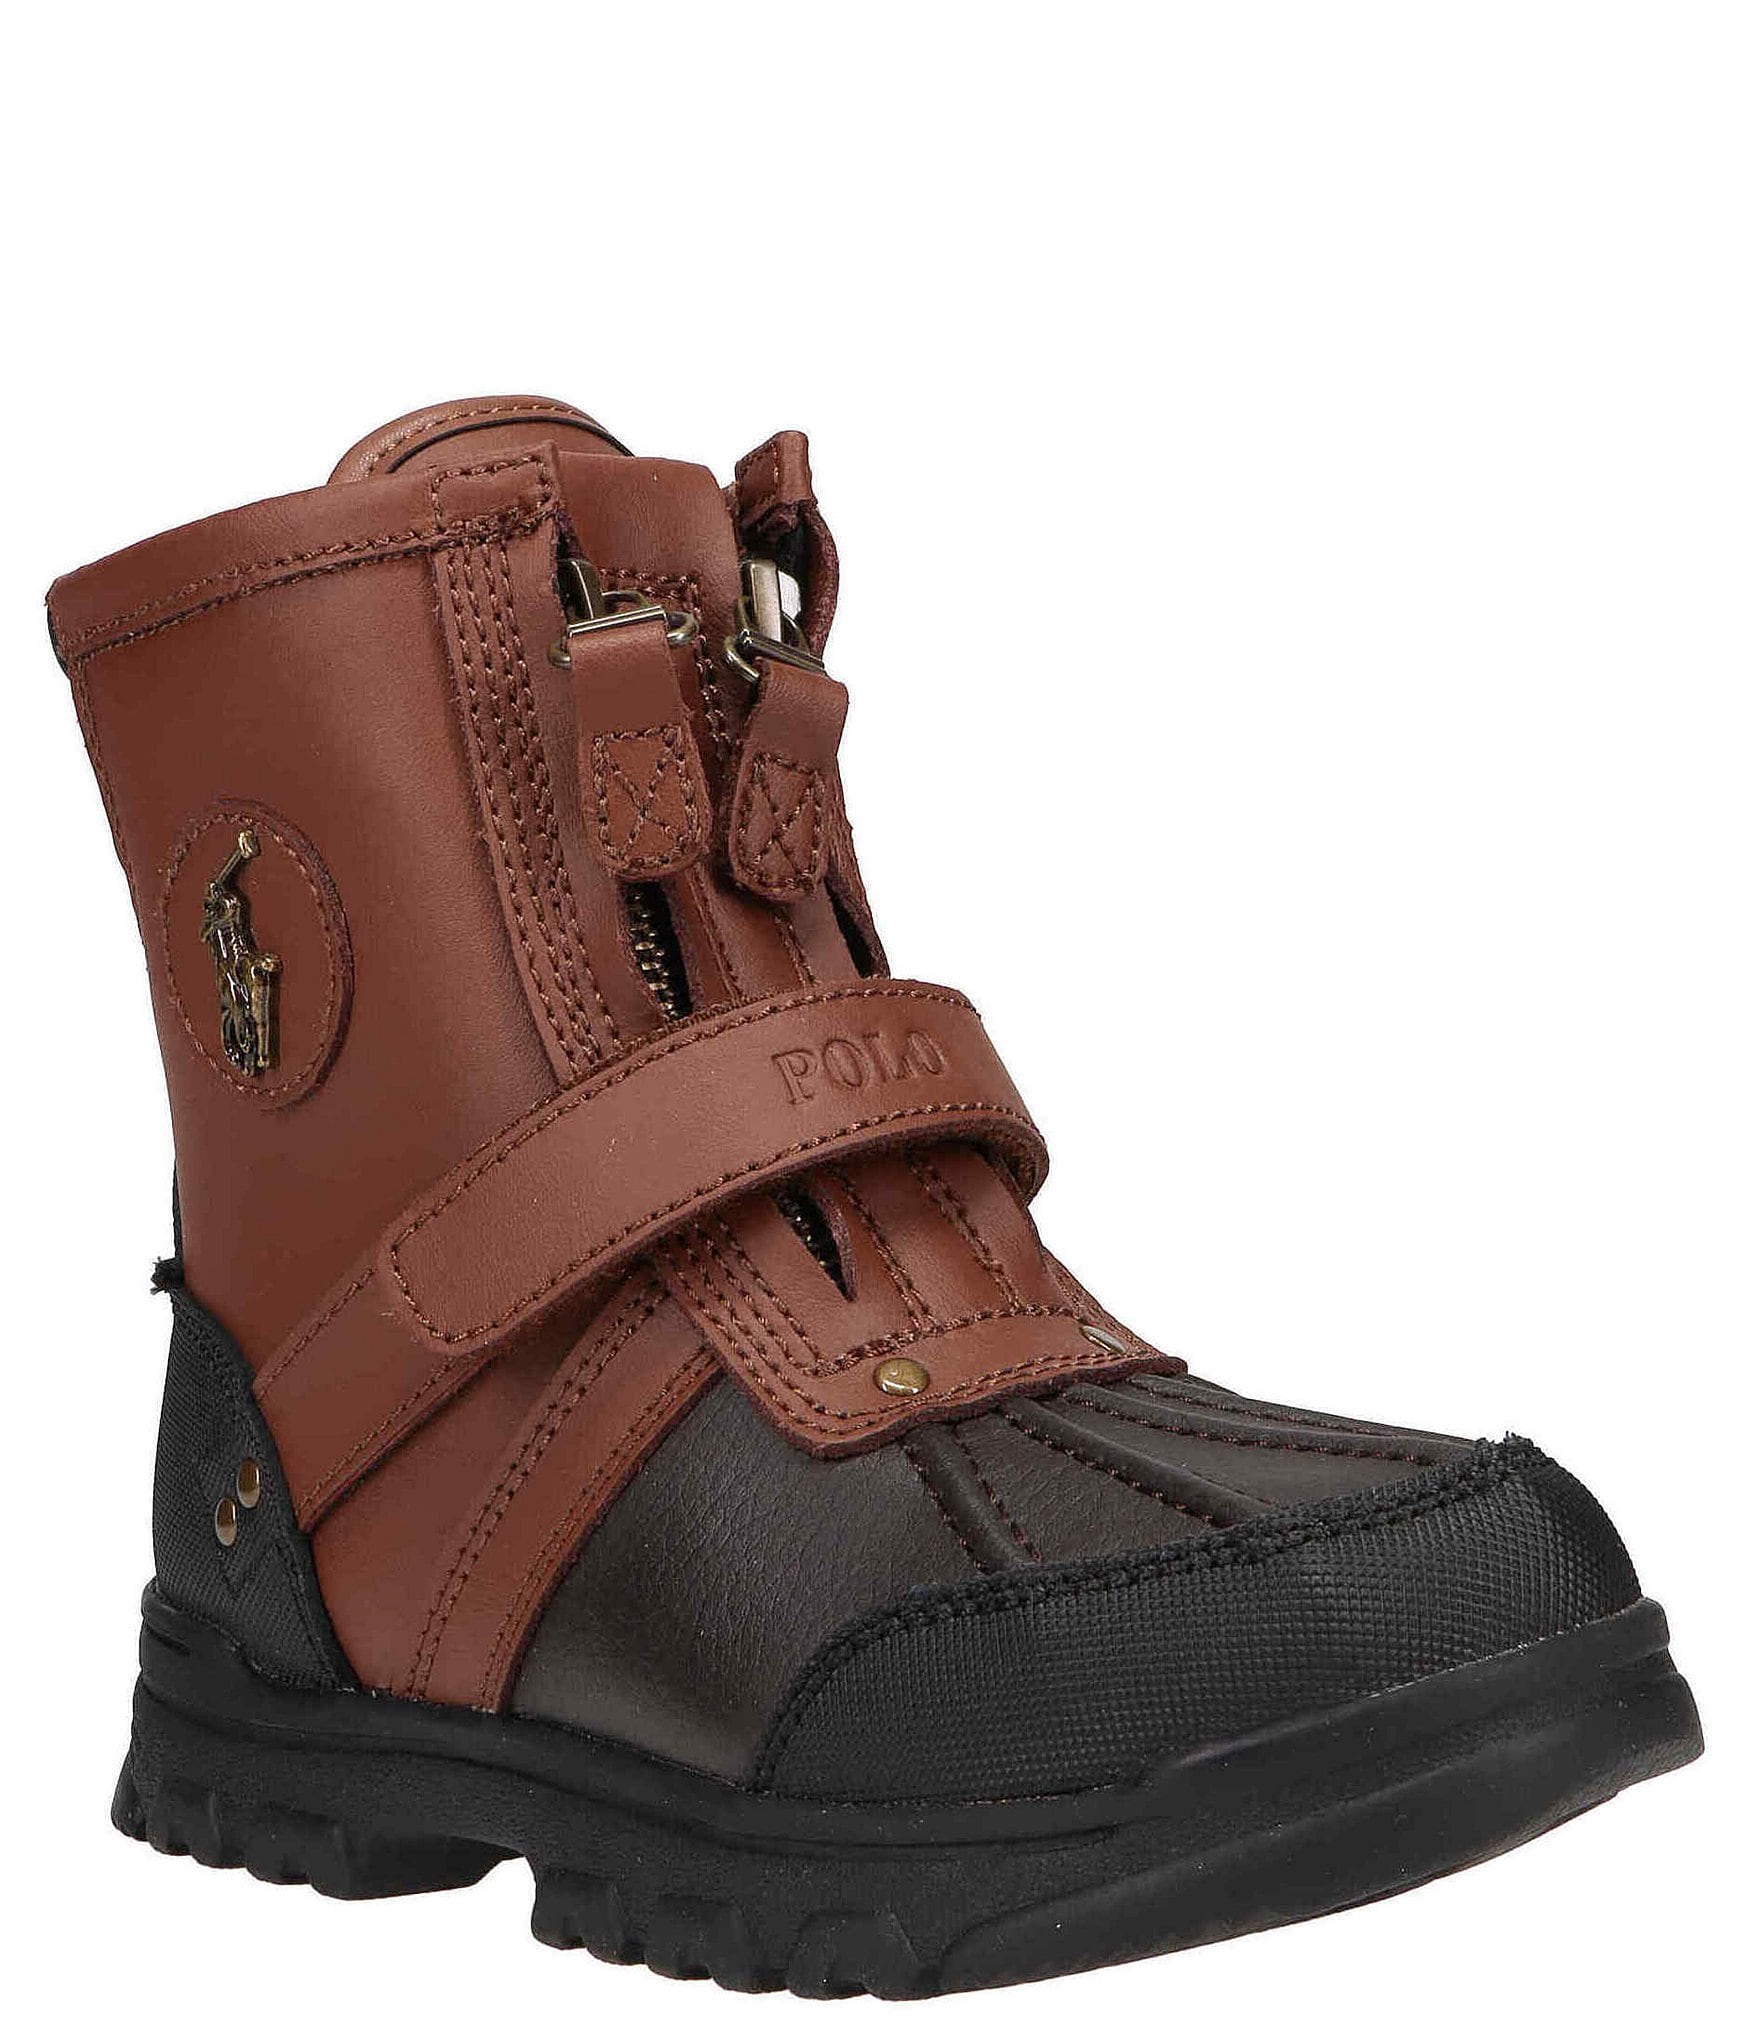 ralph lauren boots for toddlers